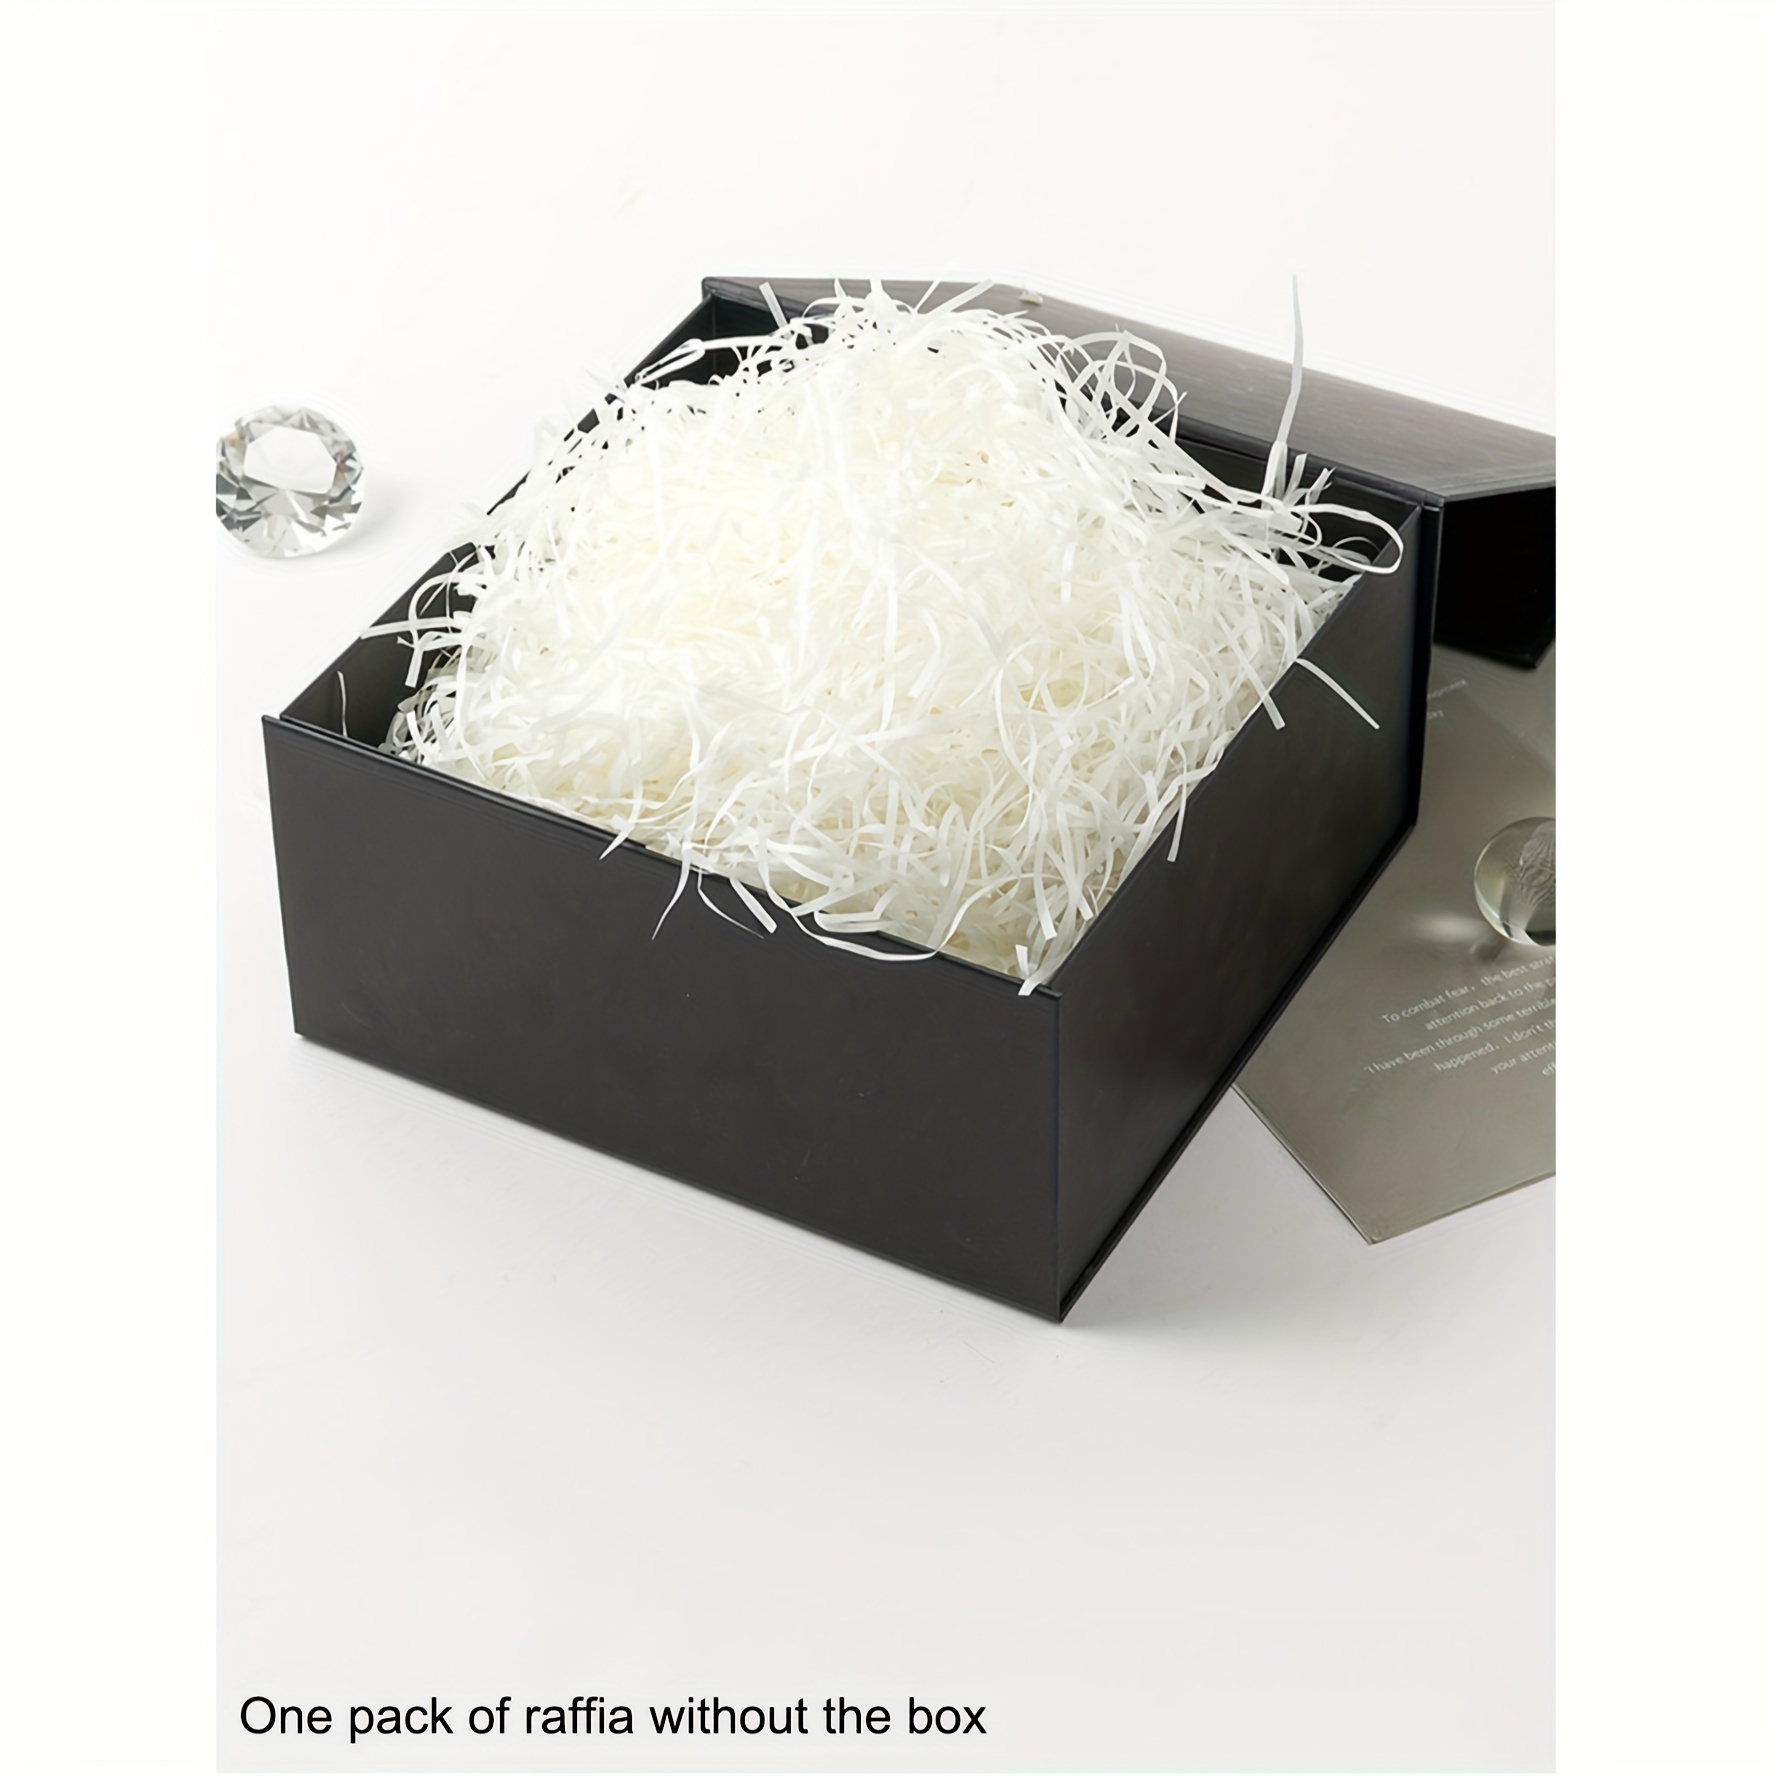 

1pc 100g/pack Raffia Paper Shreds Gift Box Filling Material Gift Packing Box Raffia Stuffing Shredded Paper Strips Wedding Candy Box Bedding Grass Decorative Materials Packaging Shredded Paper Strips